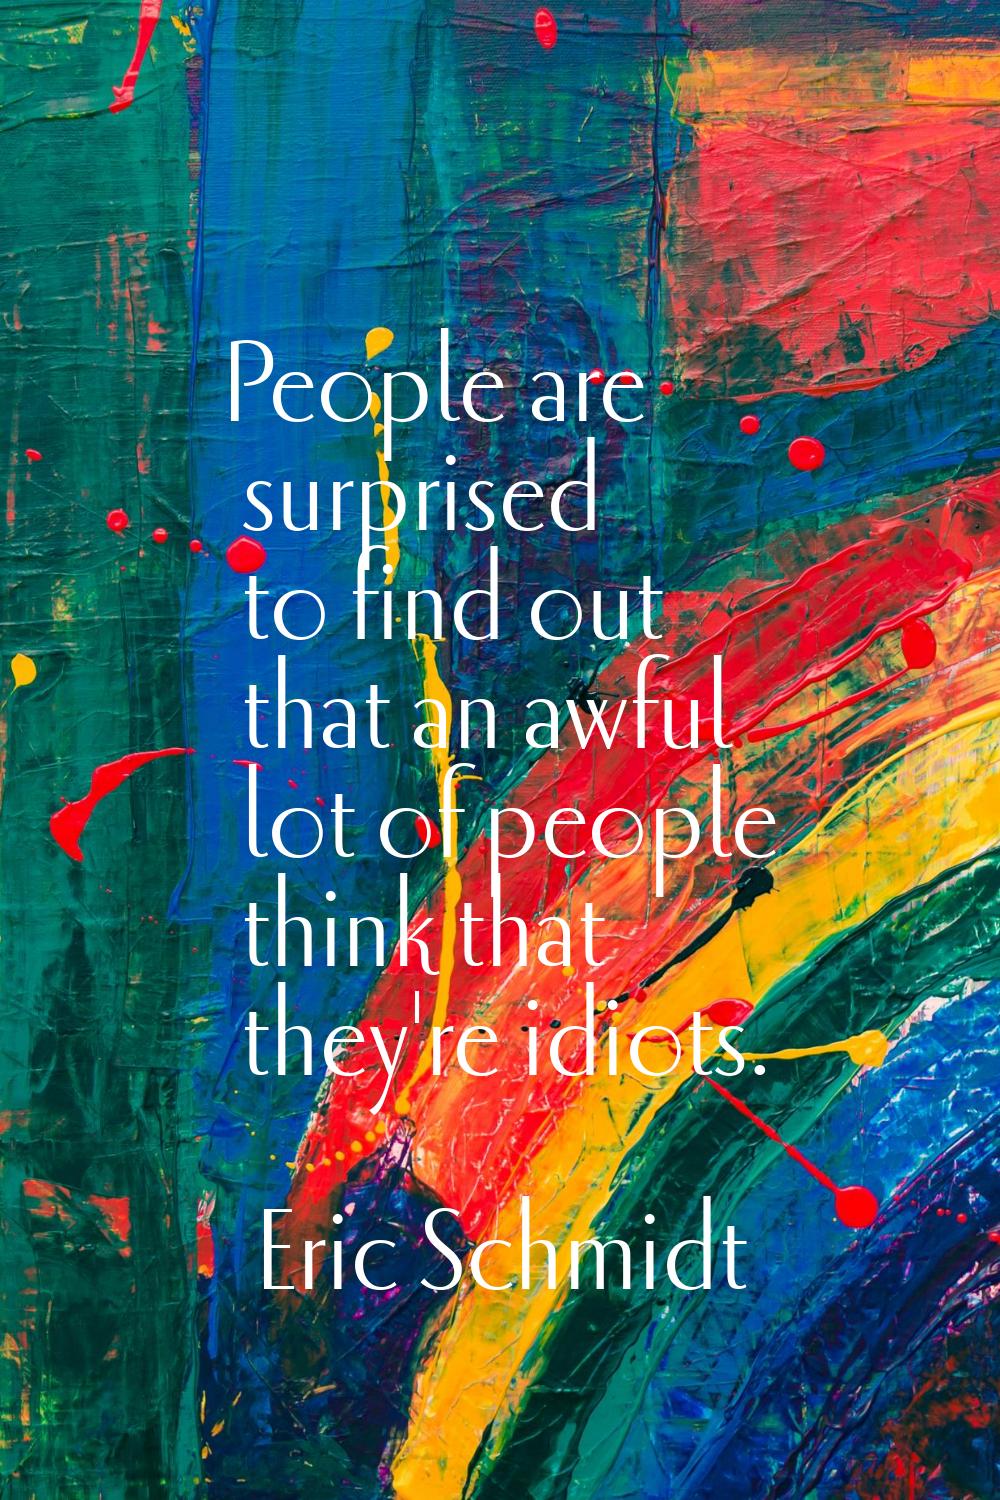 People are surprised to find out that an awful lot of people think that they're idiots.